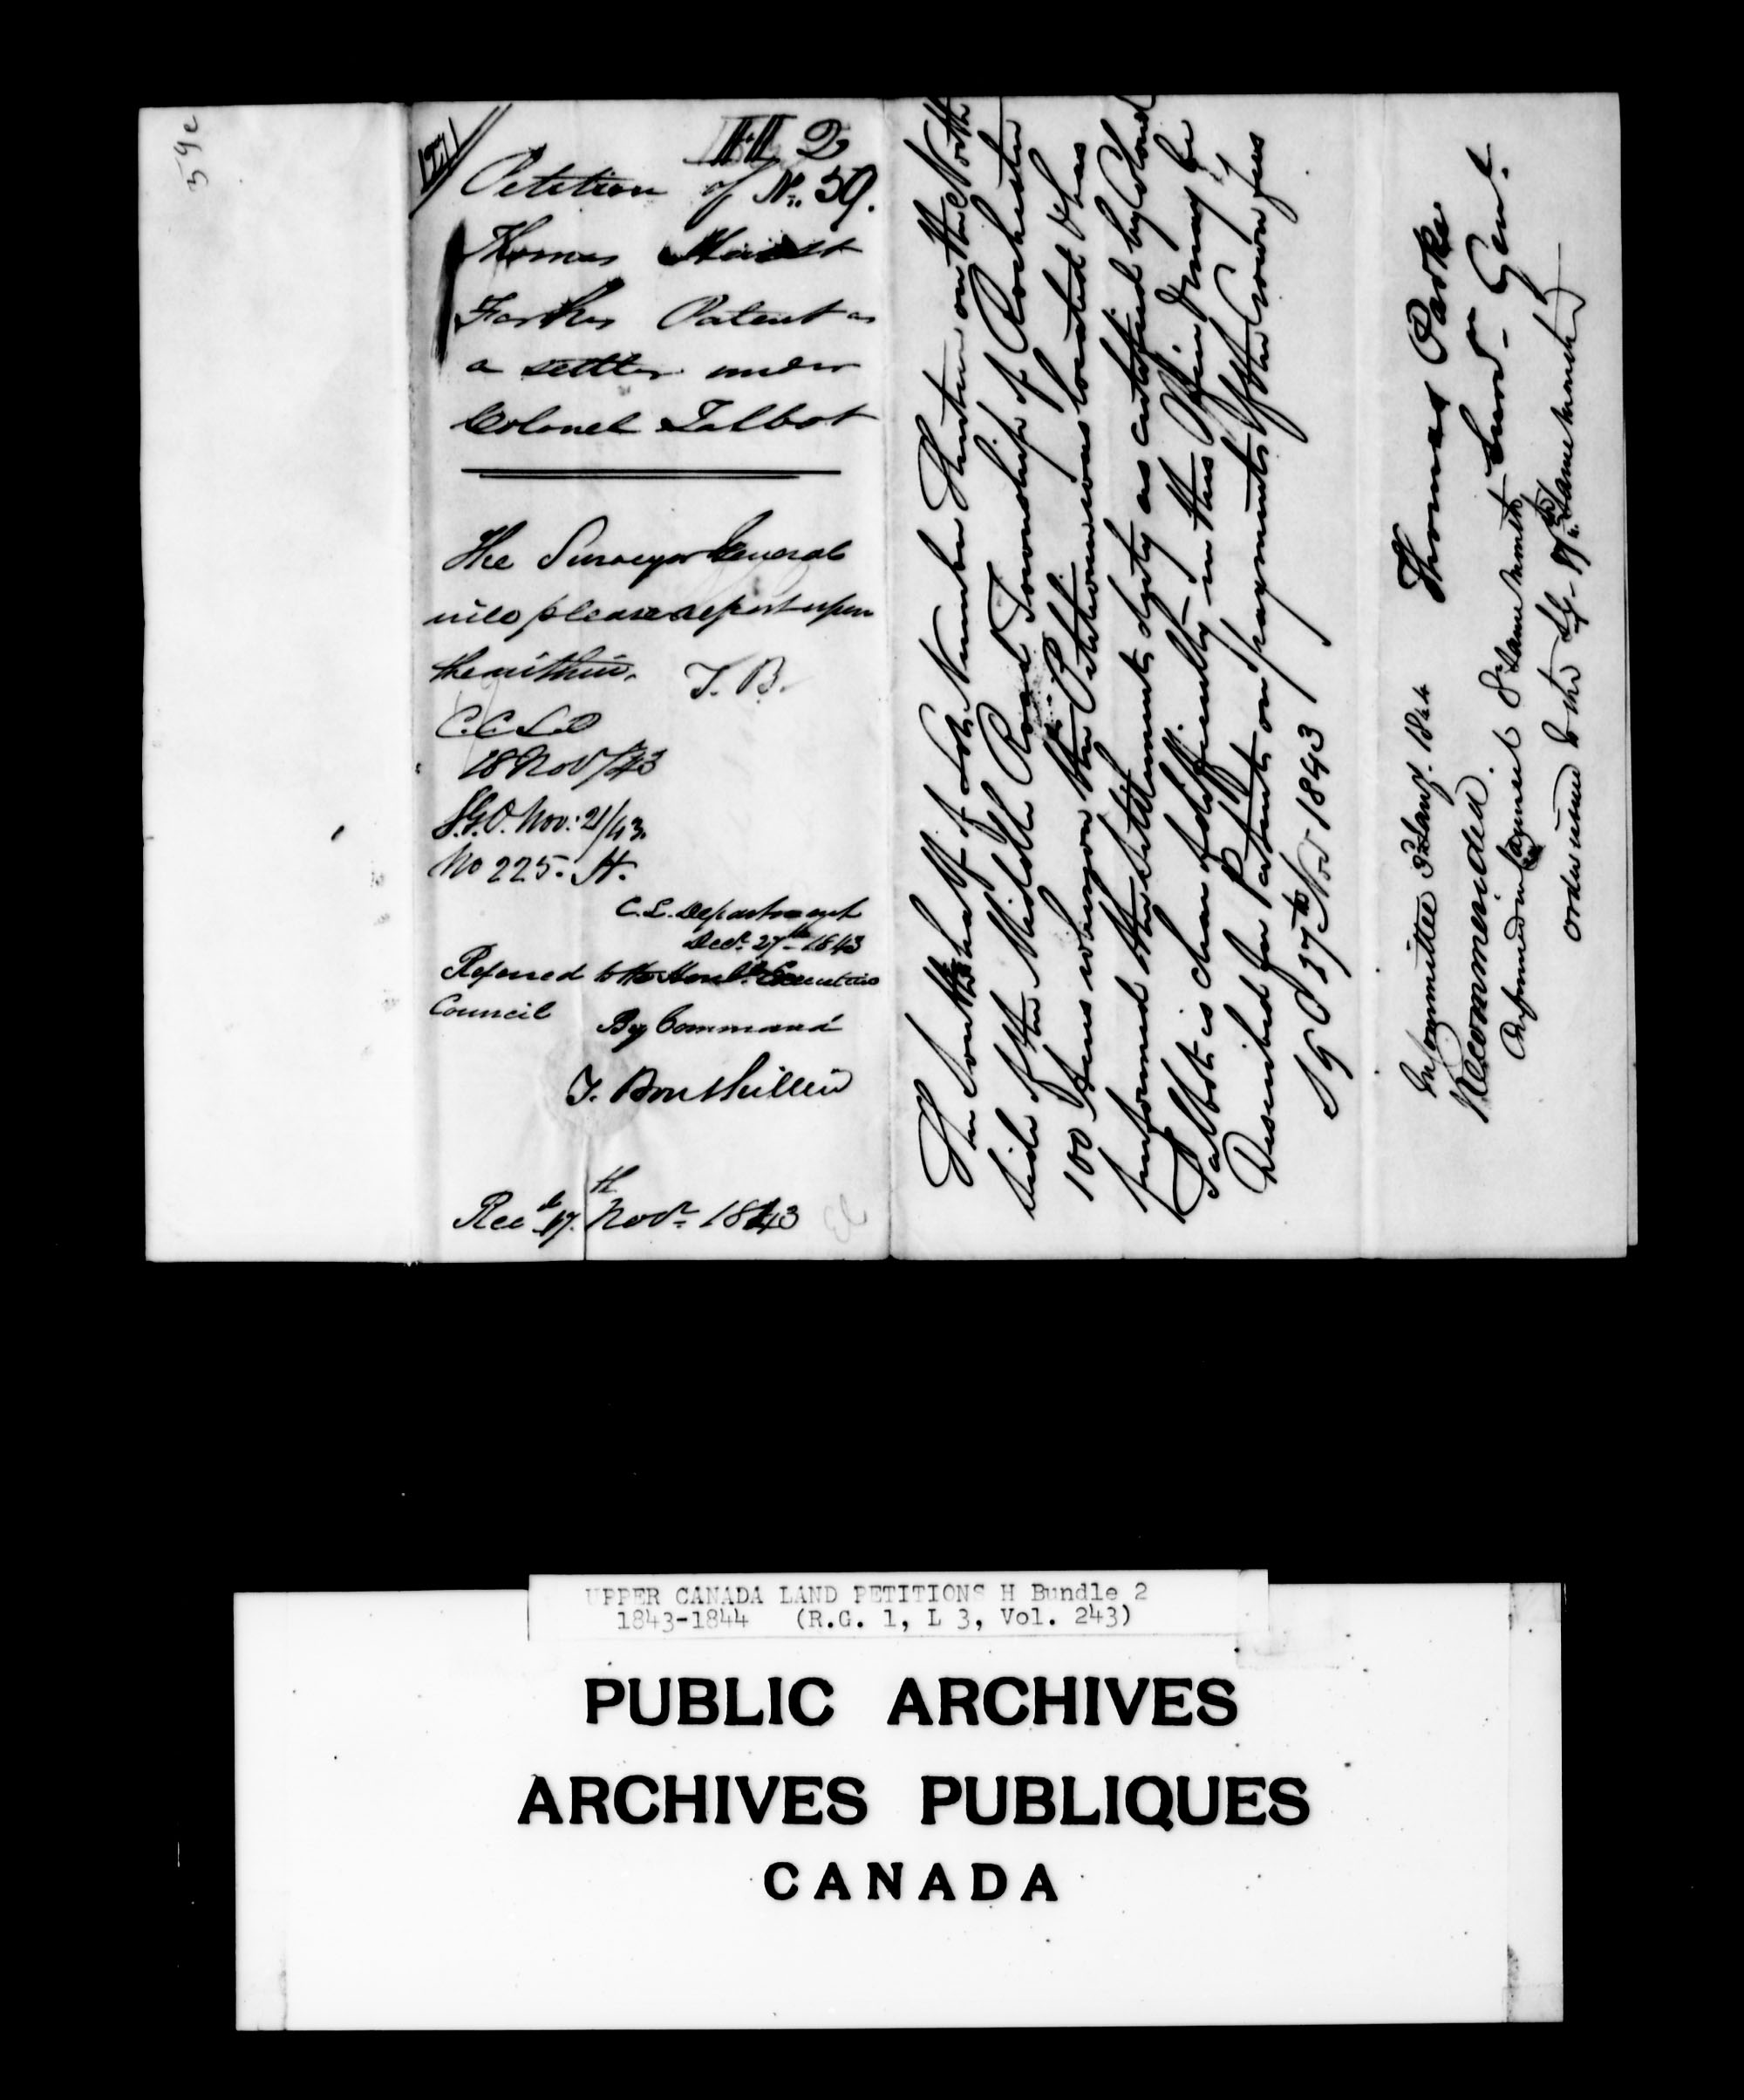 Title: Upper Canada Land Petitions (1763-1865) - Mikan Number: 205131 - Microform: c-2098